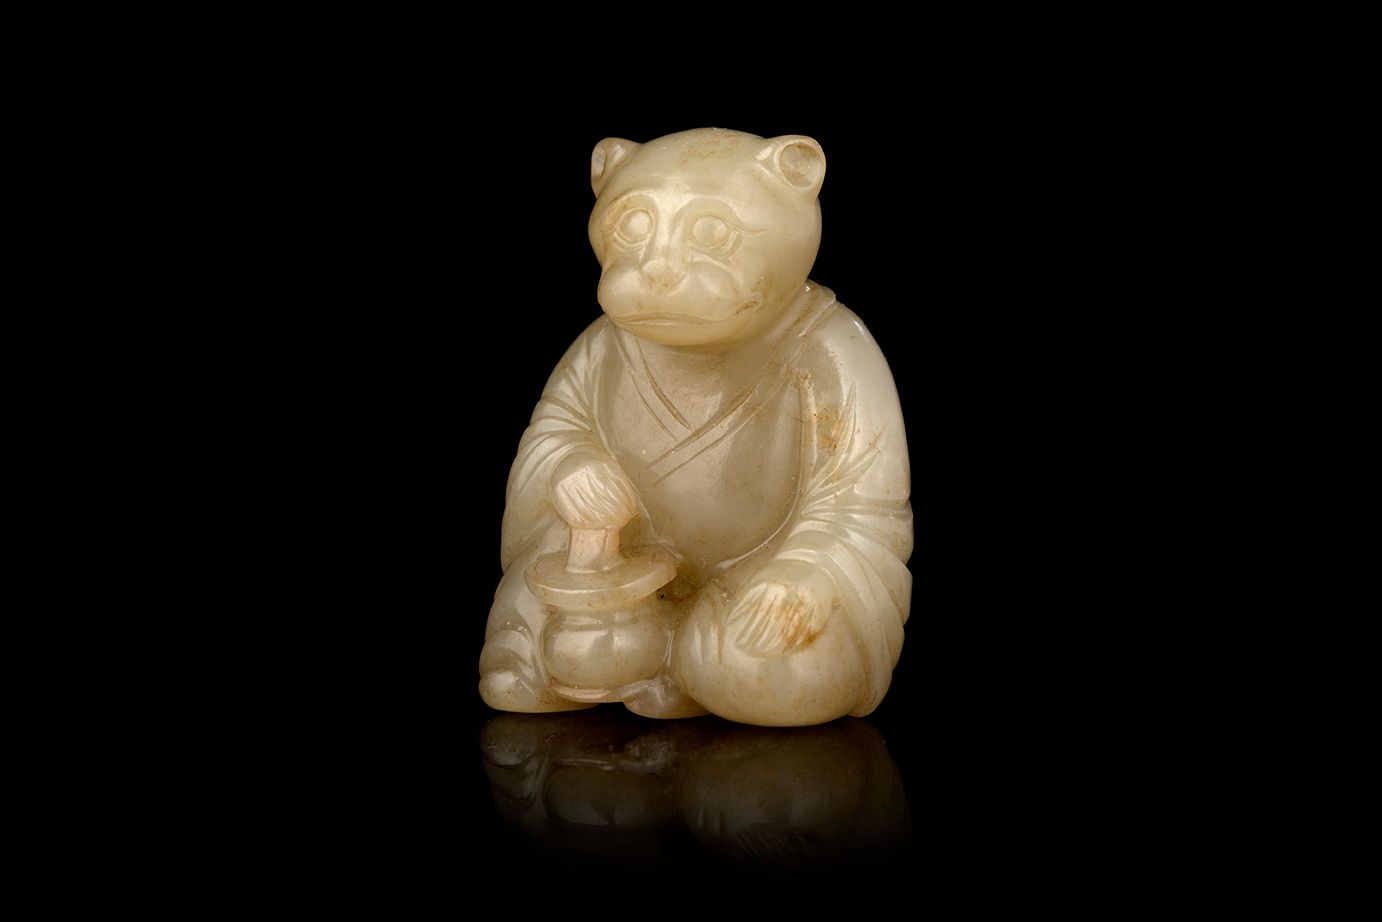 CHINE DYNASTIE QING (1644-1912) Small sculpture
Celadon jade depicting an anthro&hellip;